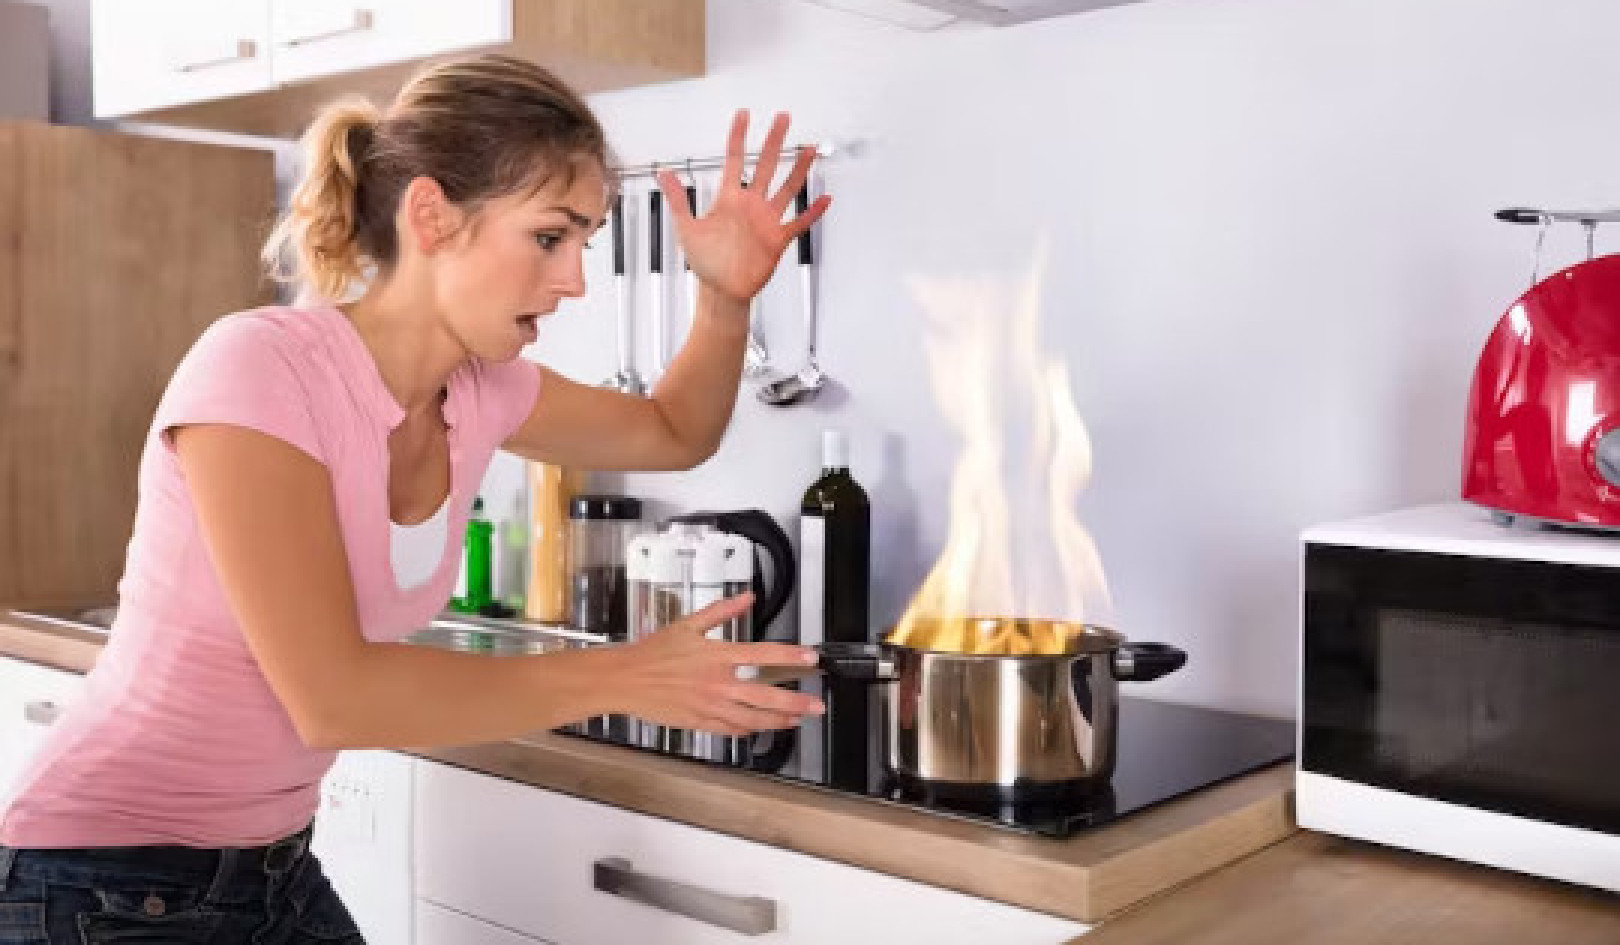 How Cooking Pollutes Your Home and What To Do About It